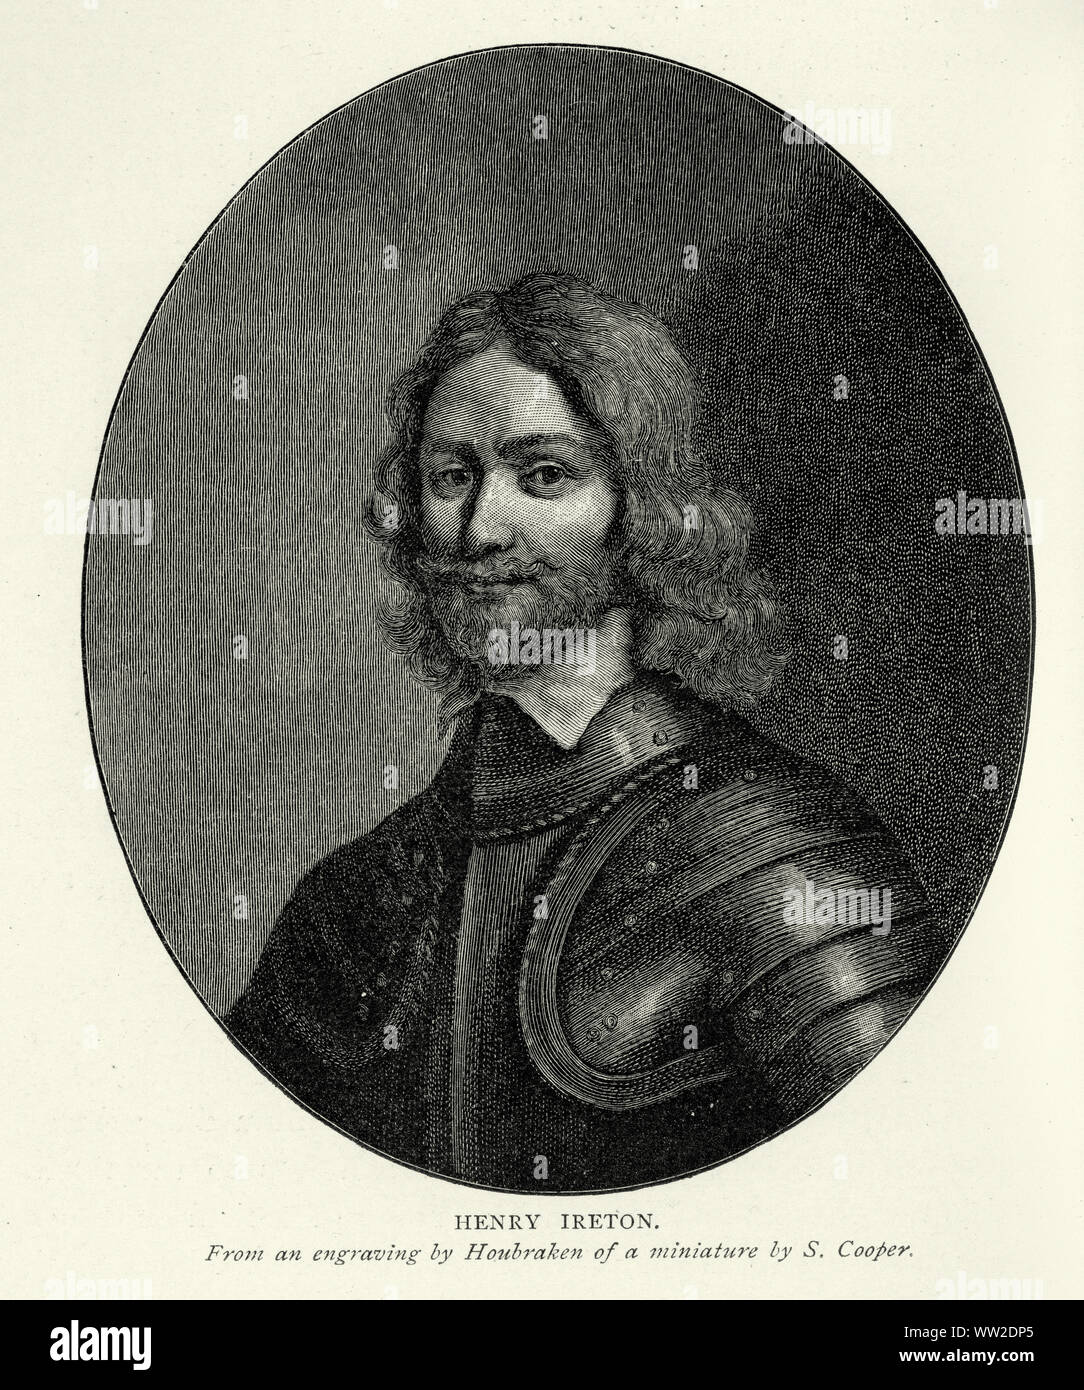 Henry Ireton (1611 – 26 November 1651) was an English general in the Parliamentary army during the English Civil War, the son-in-law of Oliver Cromwell. Stock Photo